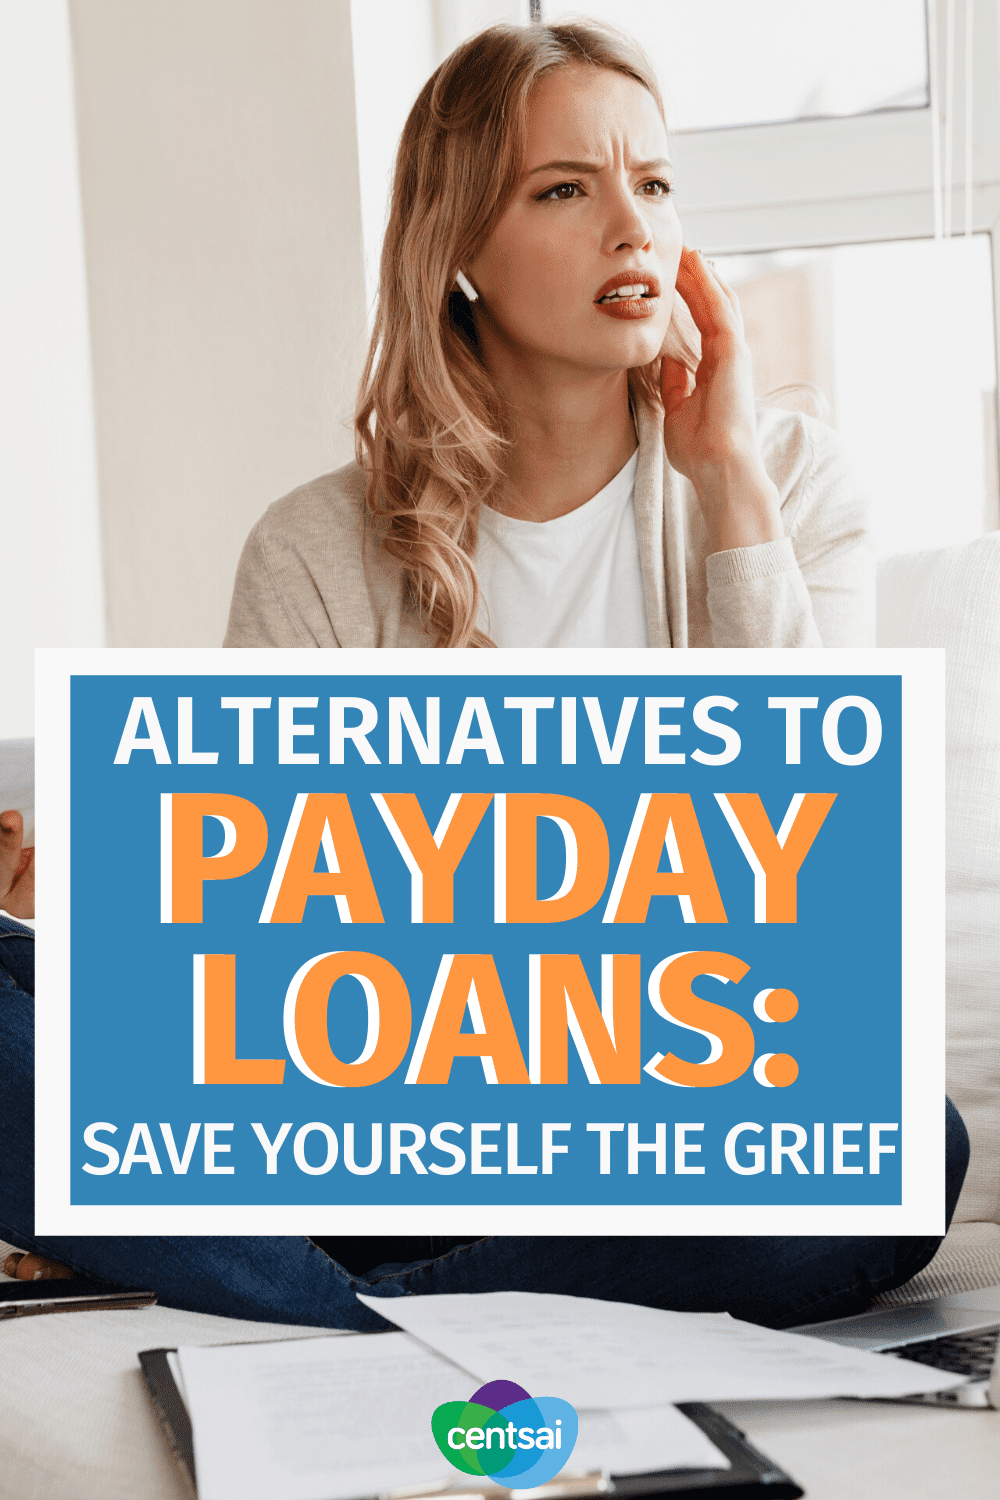 Alternatives to Payday Loans: Save Yourself the Grief